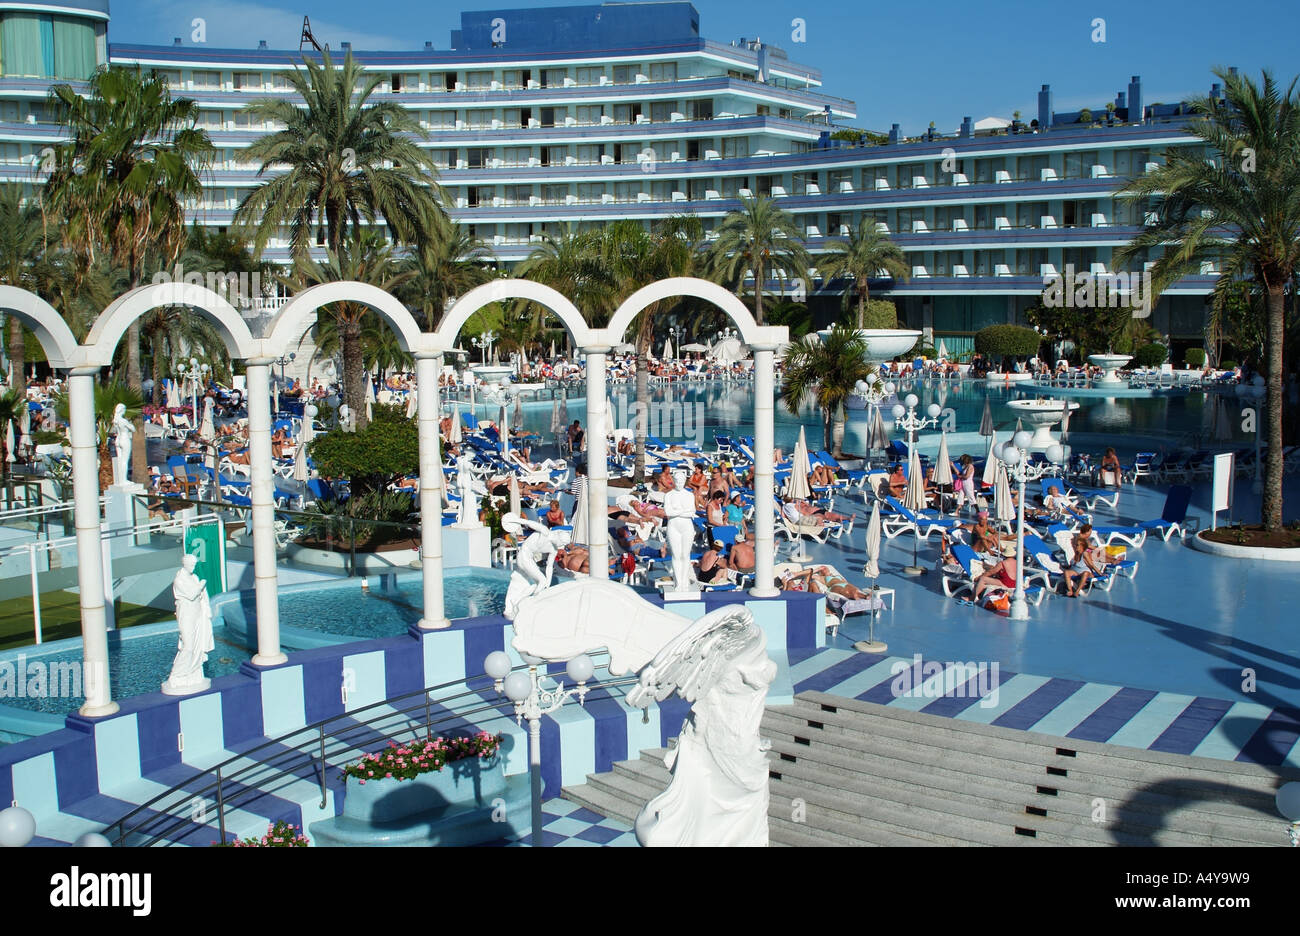 Las Americas southern Tenerife Canary Islands Spain the Mare Nordstrum  resort complex venue soaking up the sun Stock Photo - Alamy